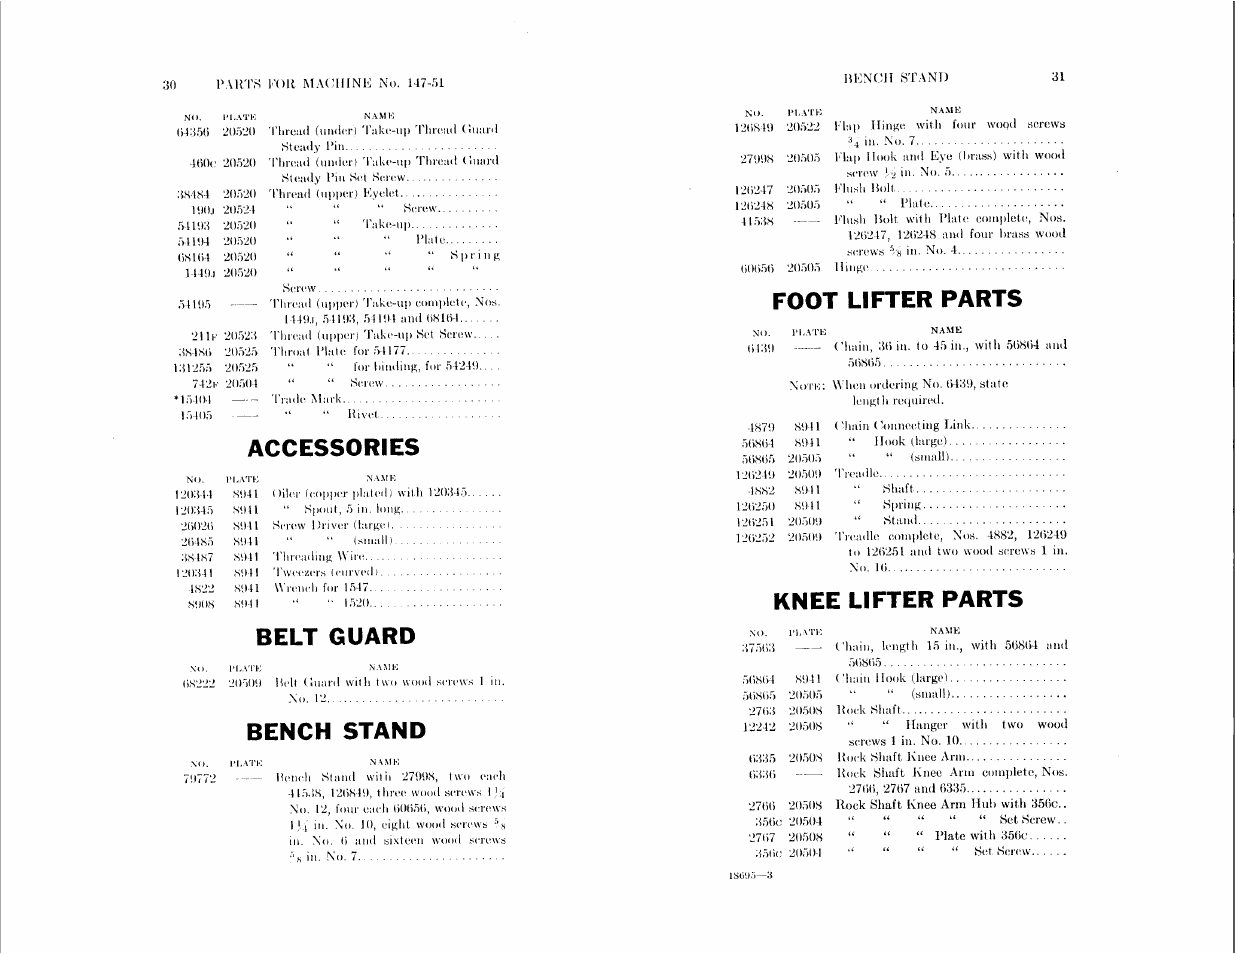 Accessories, Foot lifter parts, Knei belt guard | Bench stand | SINGER 147-51 User Manual | Page 15 / 39